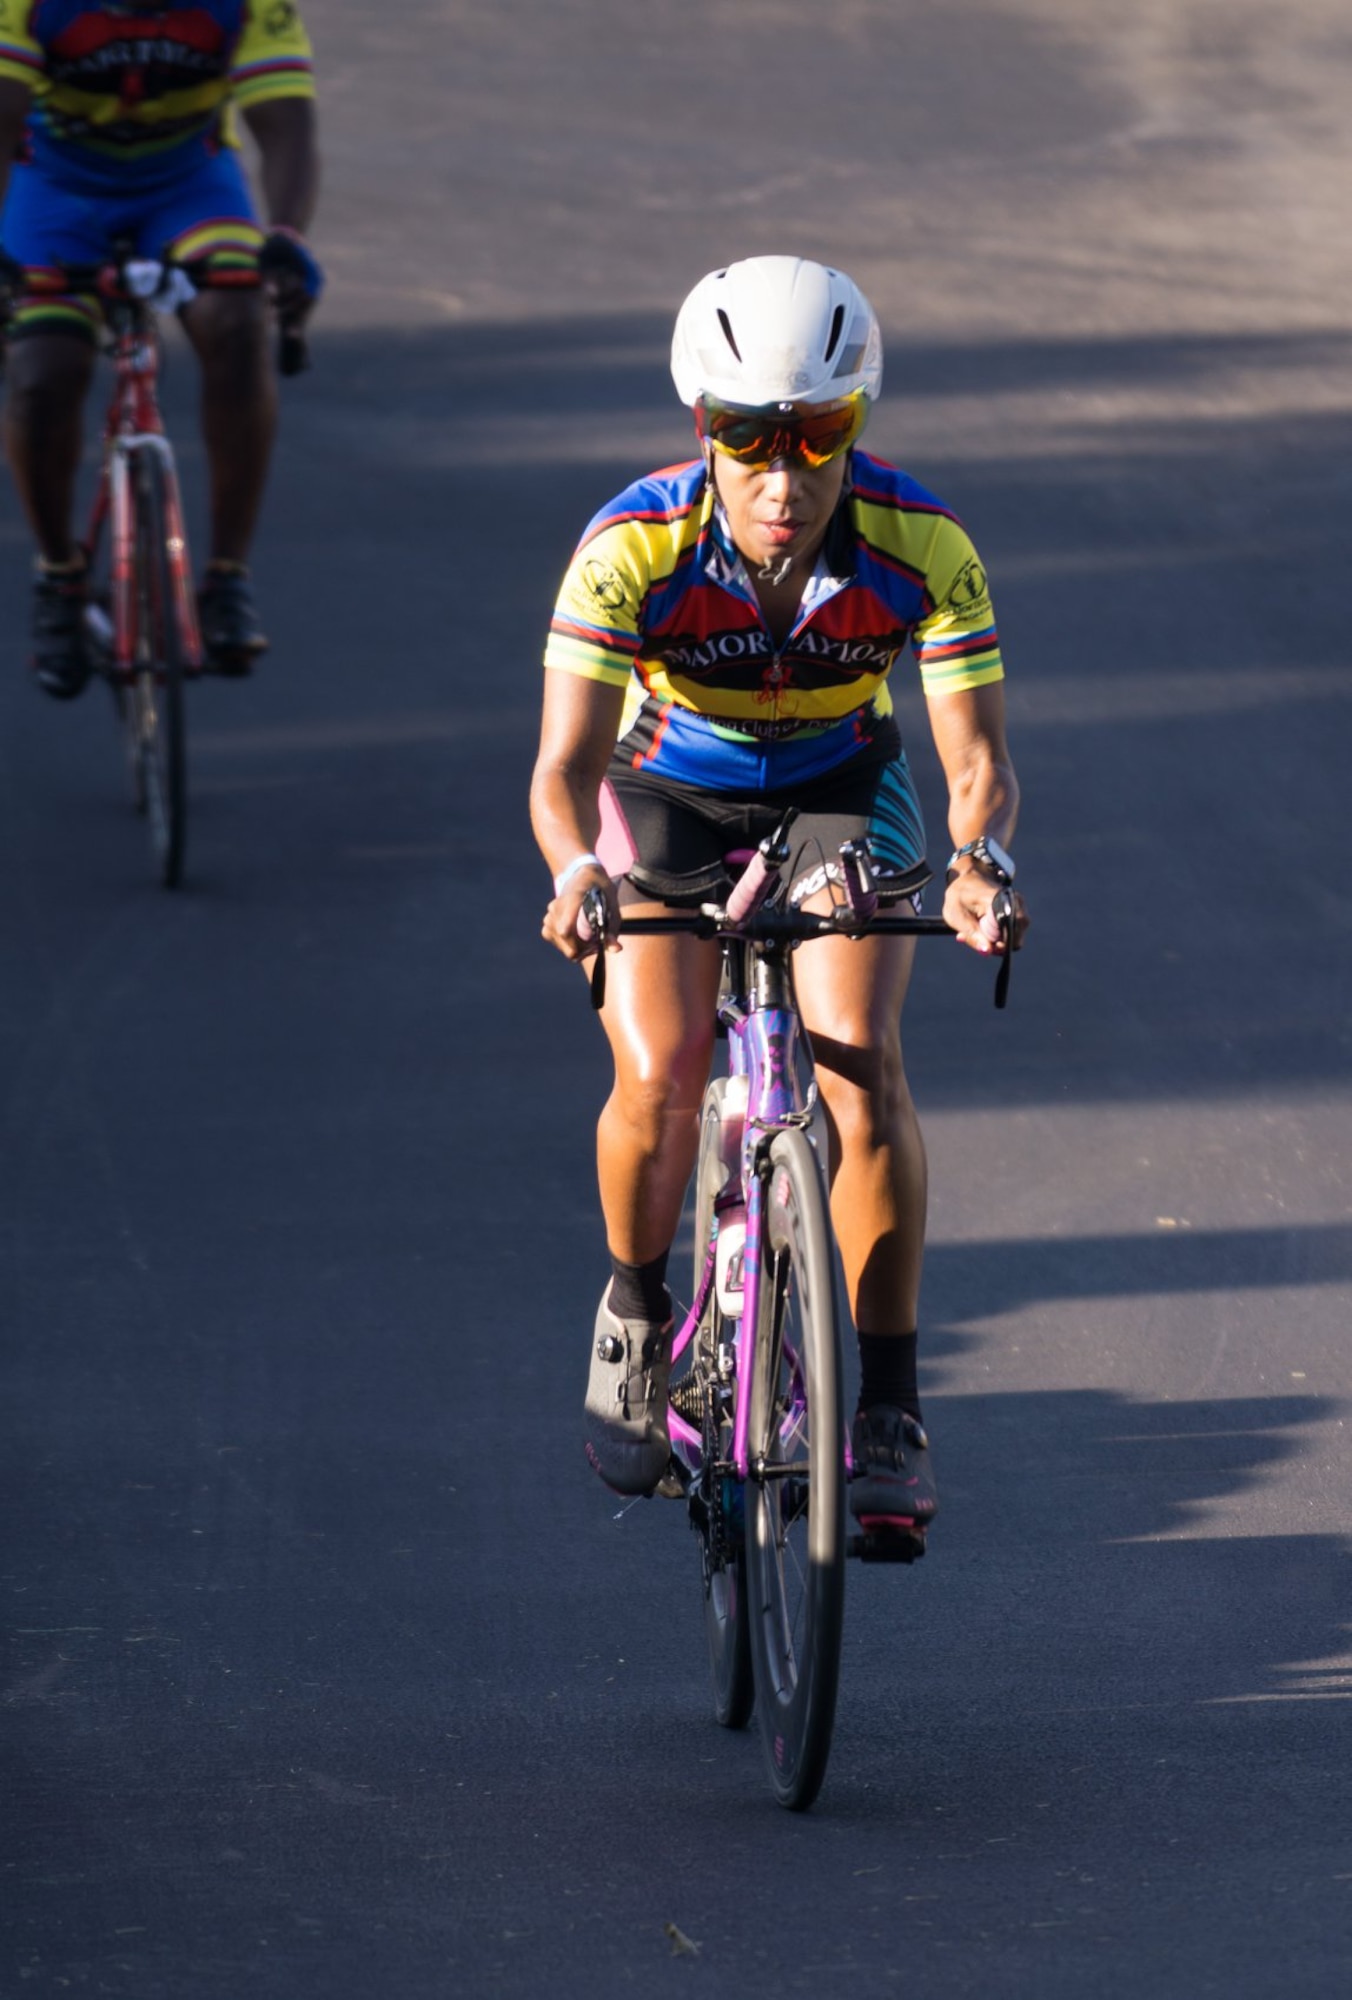 Col. Yvonne Spencer rides in the Major Taylor Cycling Club of Dayton Signature Ride July 13 in Dayton, Ohio. Spencer is the commander of AFIMSC Detachment 6 at Wright-Patterson Air Force Base, Ohio.